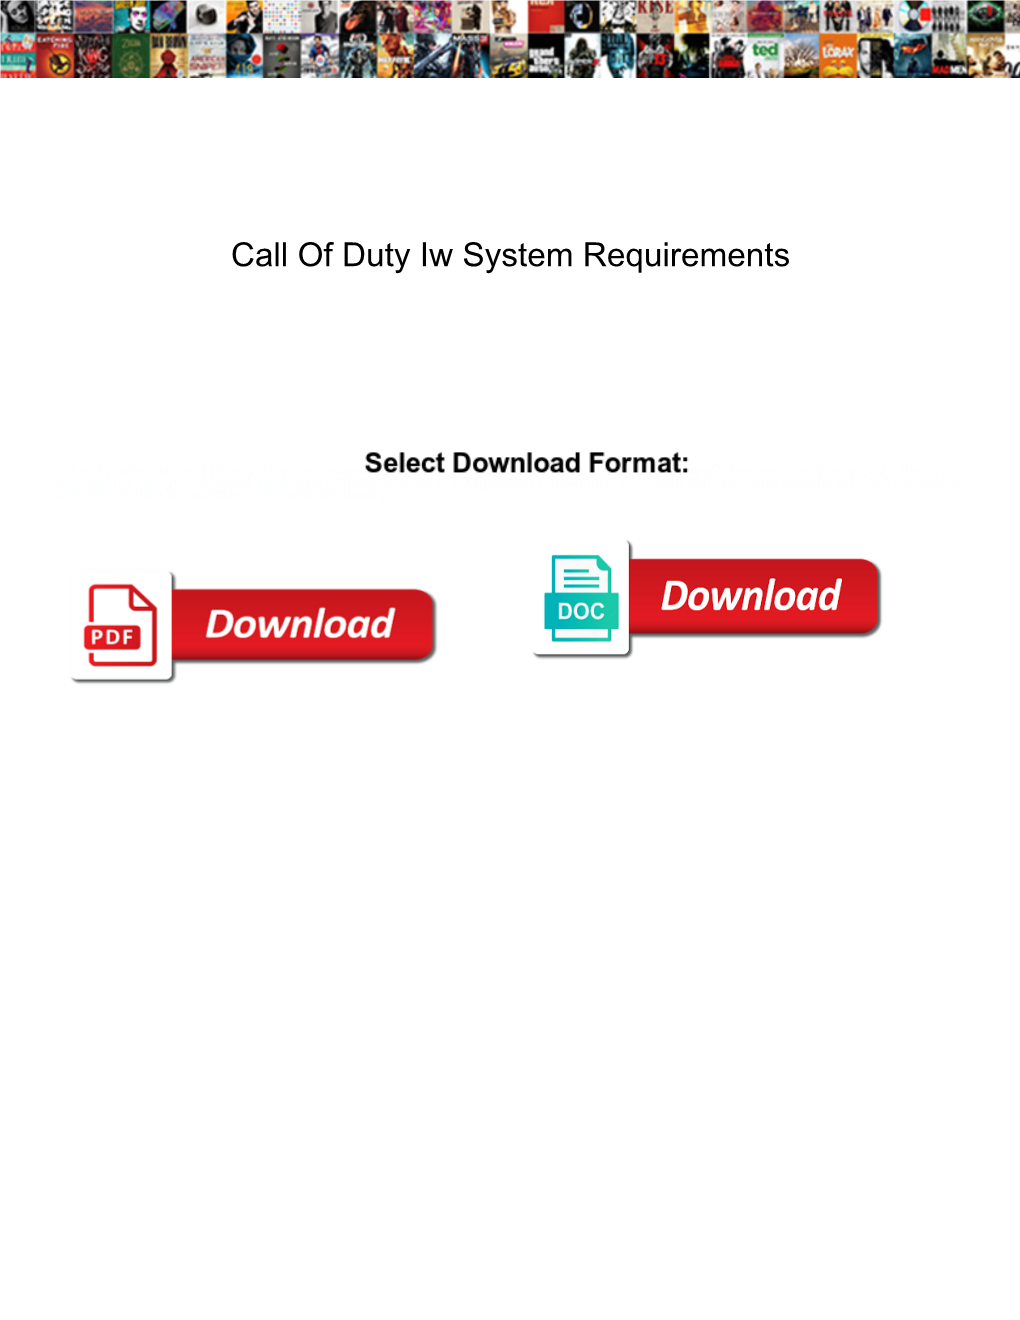 Call of Duty Iw System Requirements